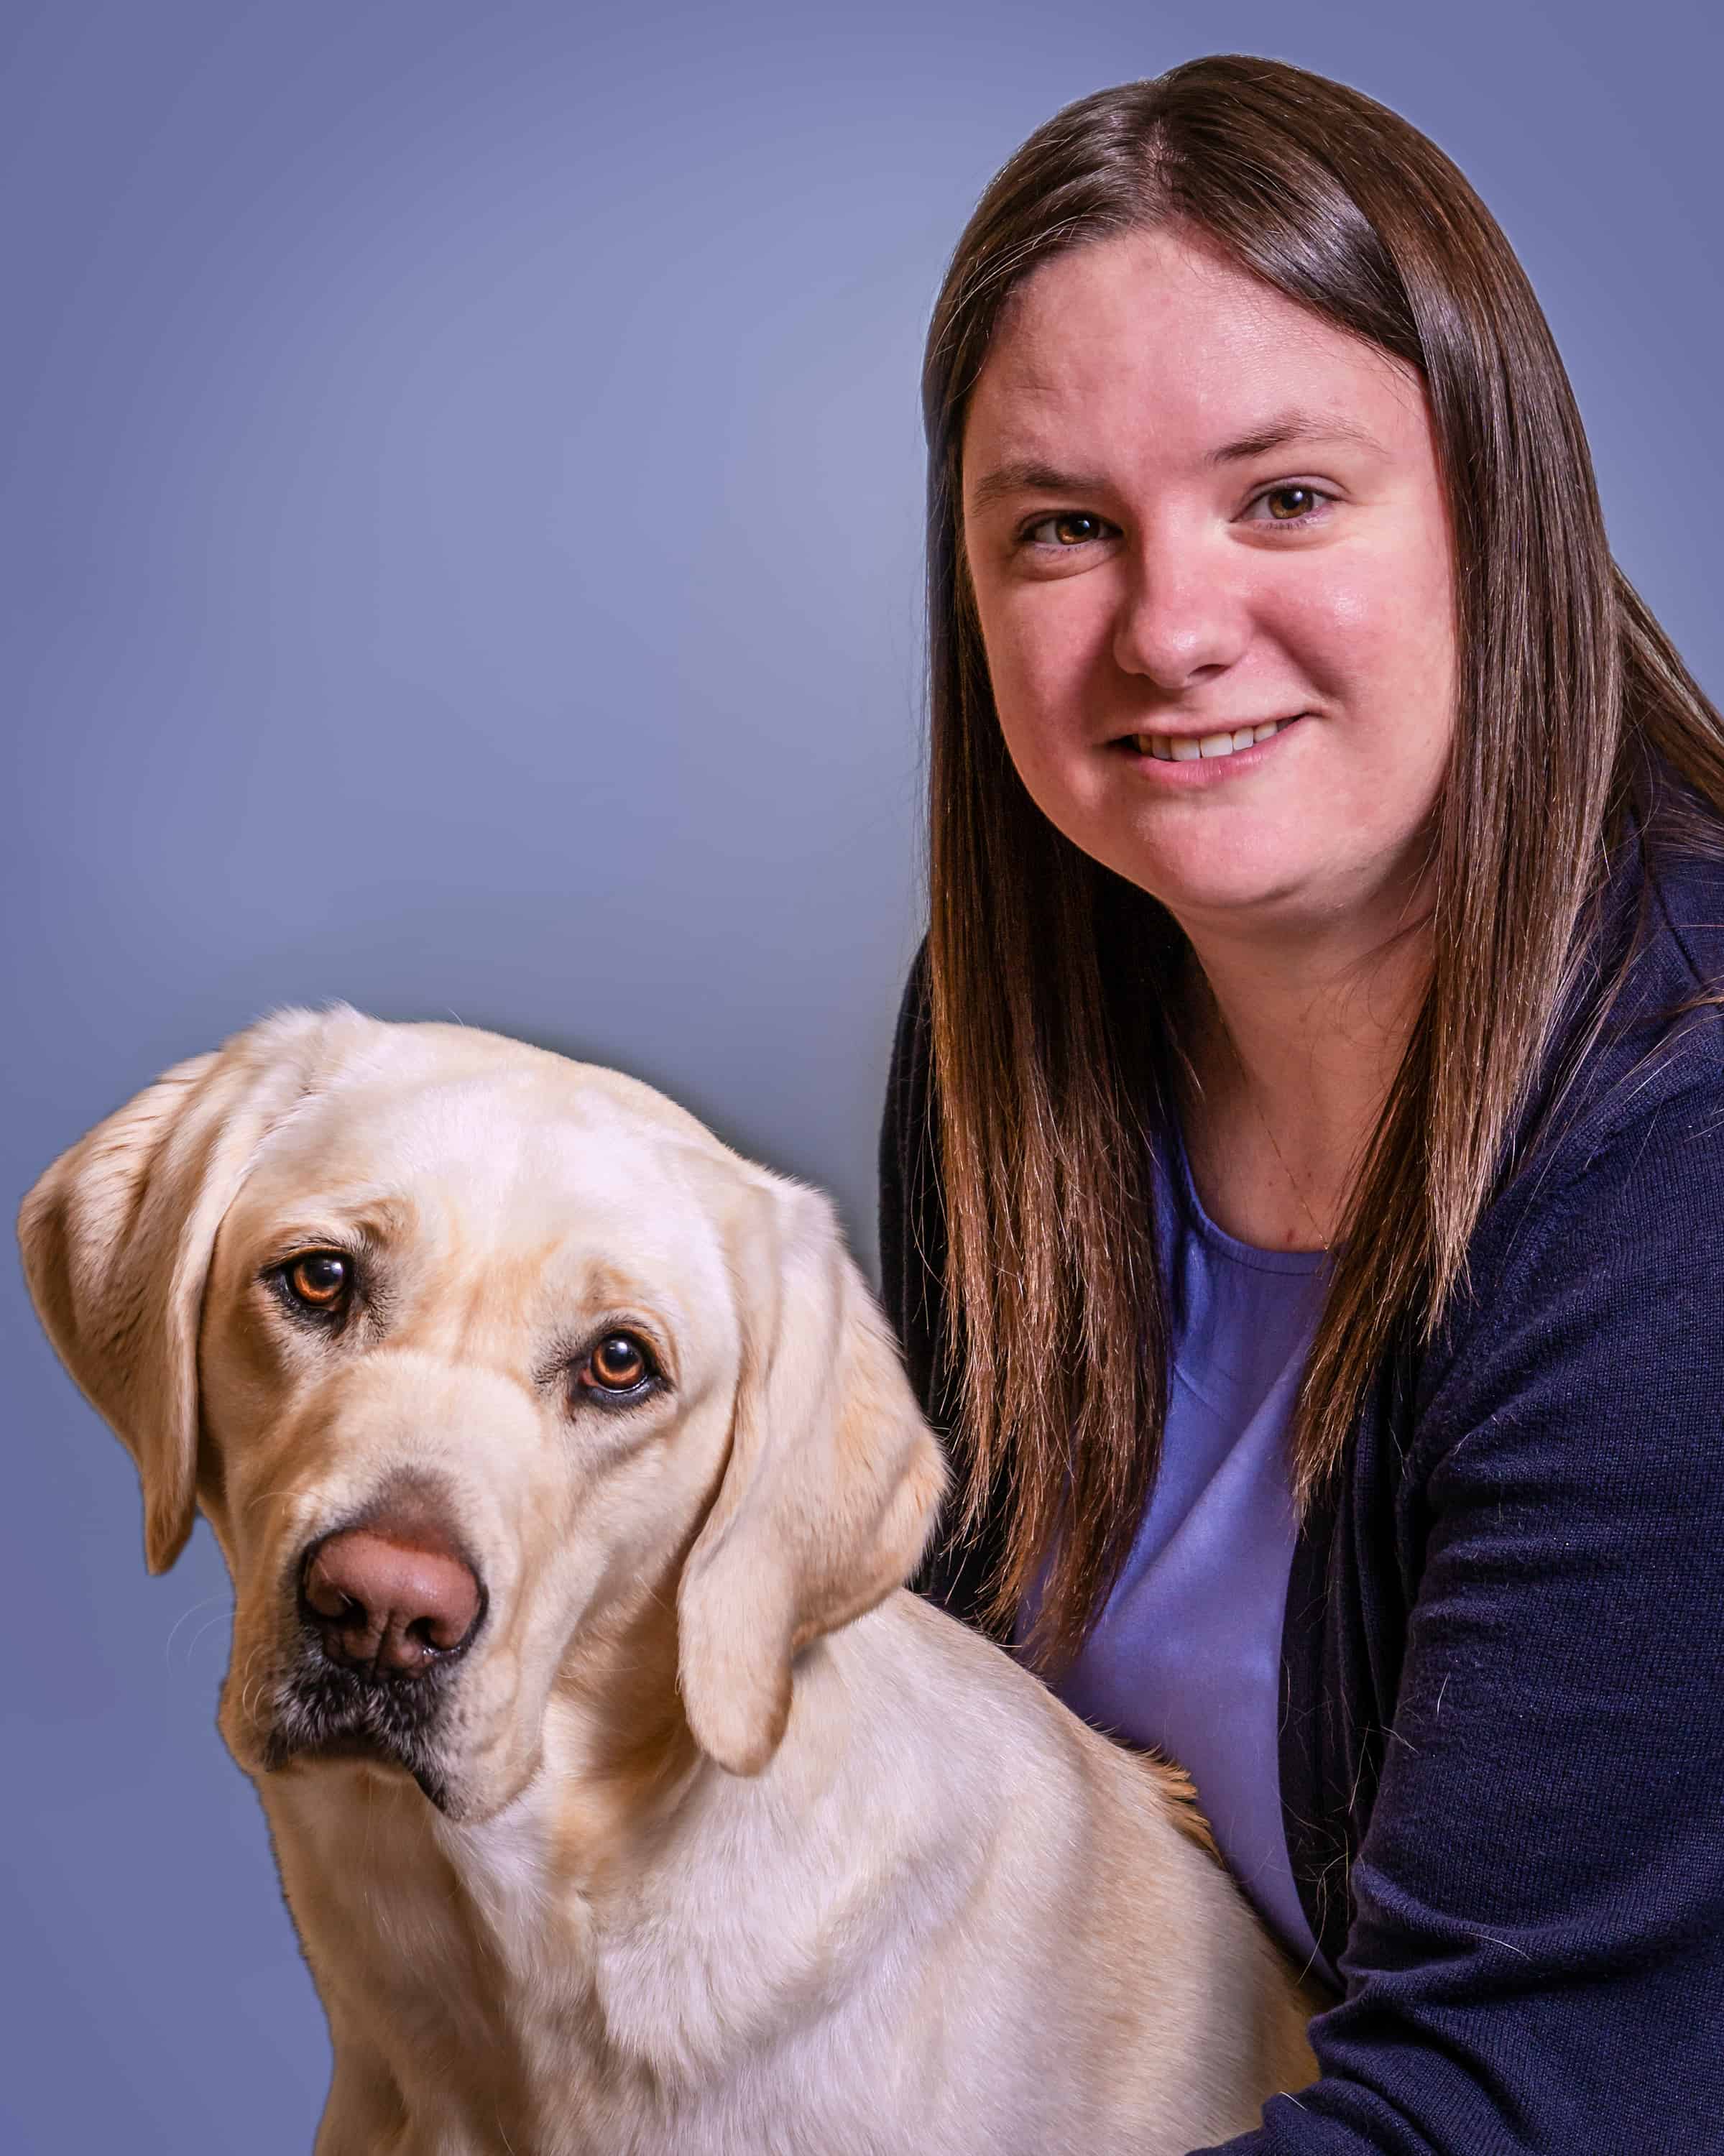 Why I Work at Dogs for Better Lives: Amy Perrow